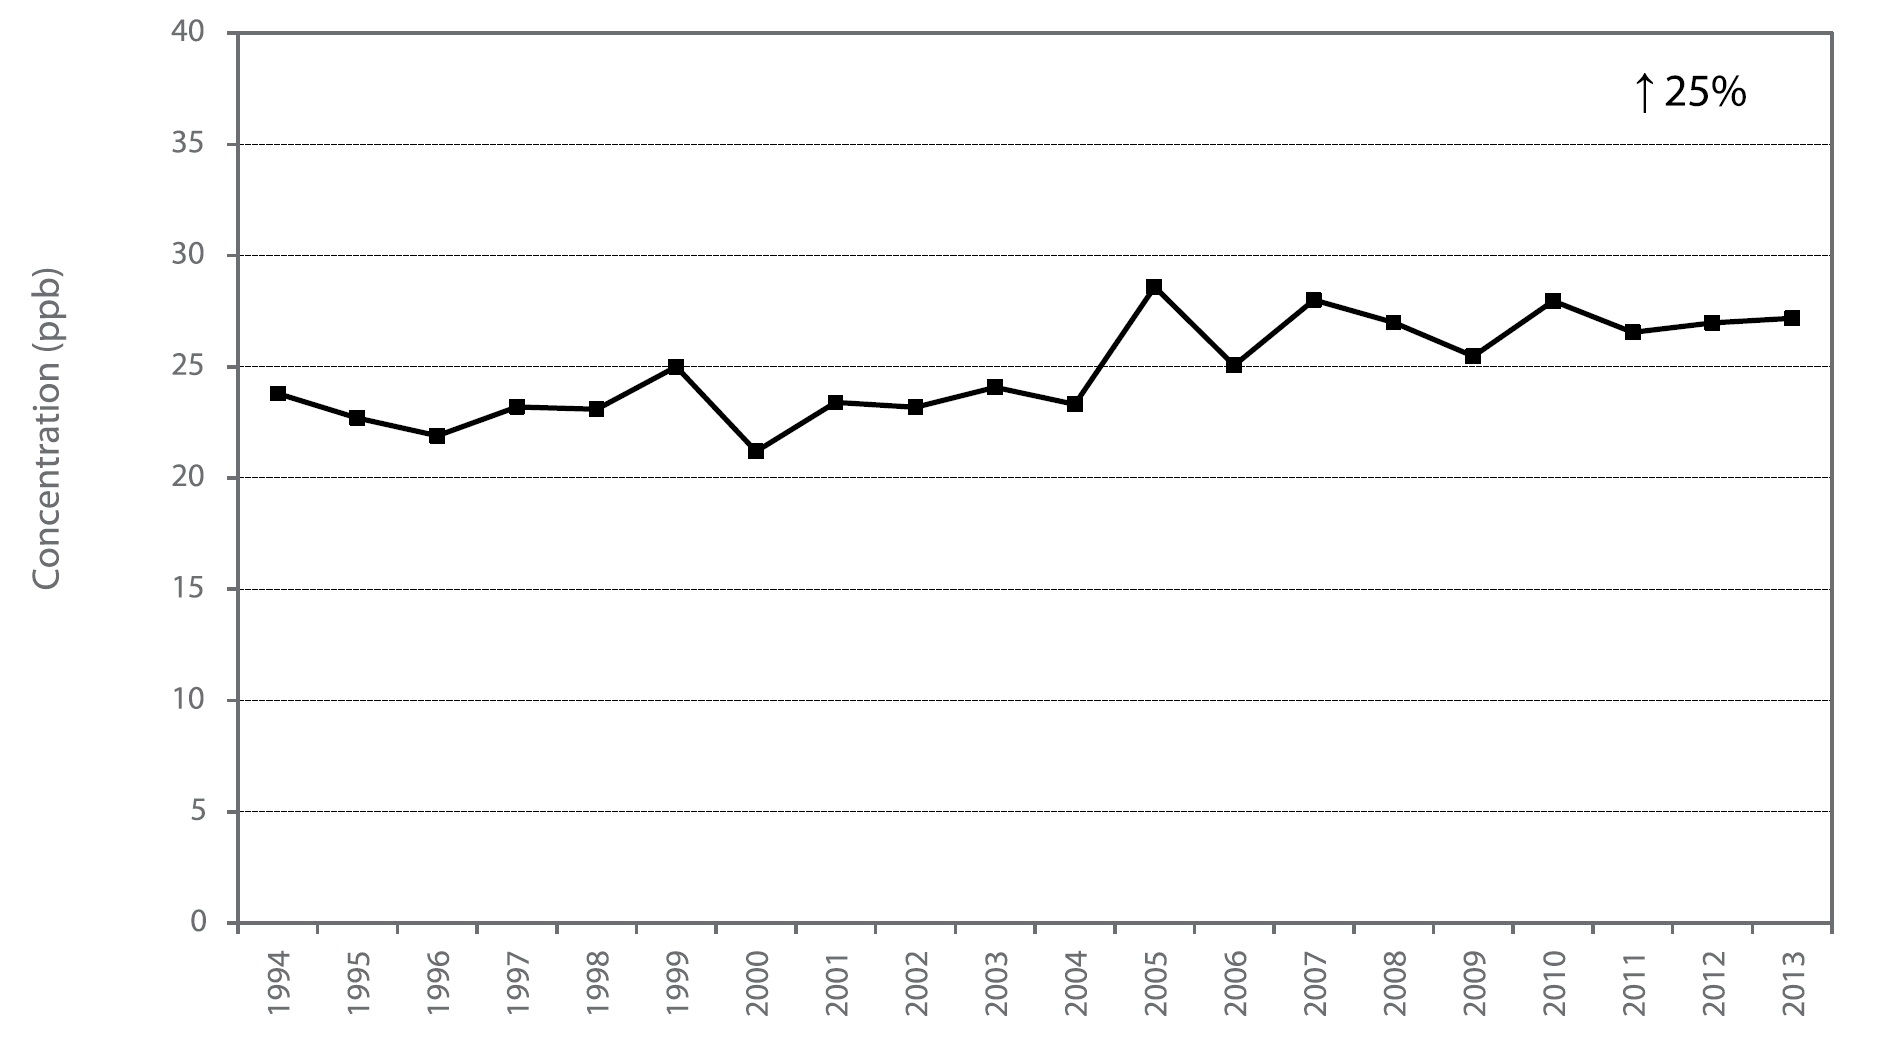 Figure A18 is a line chart displaying the ozone annual mean at Oshawa from 1994 to 2013. Over this 20-year period, ozone increased 25%.